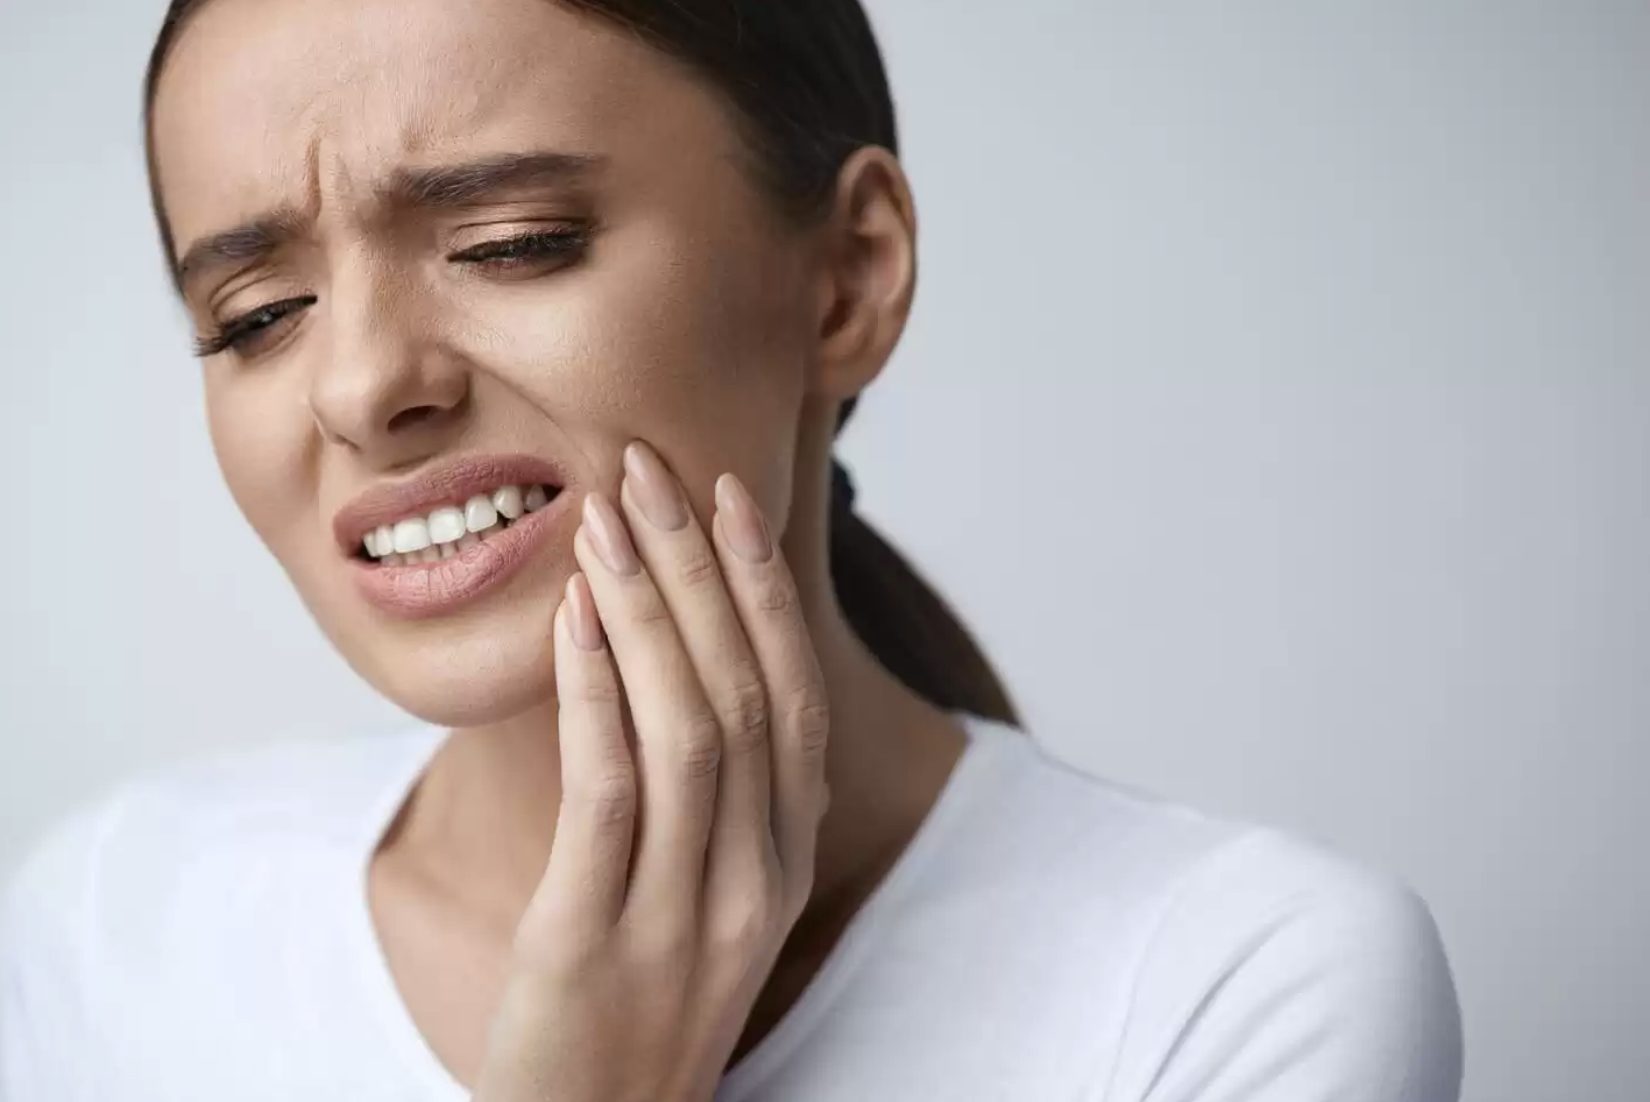 Bone Infection After Tooth Extraction: Symptoms, Treatment and Prevention